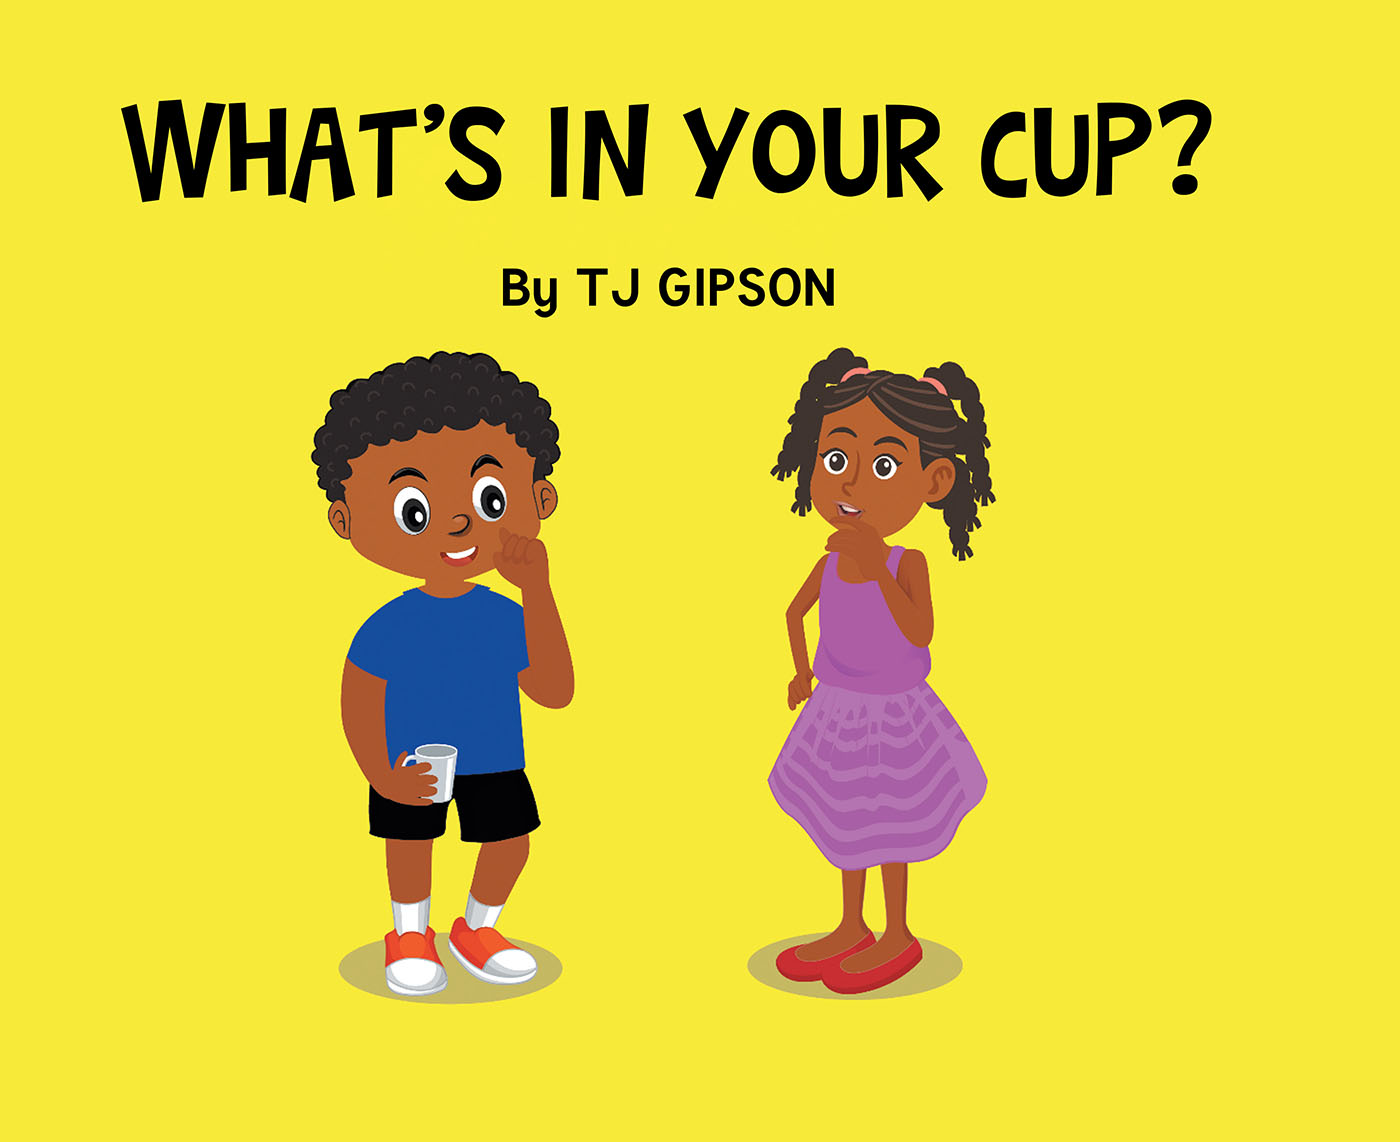 Author TJ Gipson’s New Book, "What's in Your Cup?" Follows Two Siblings as They Play a Game Designed by Their Grandmother to Teach Them the Importance of Drinking Water